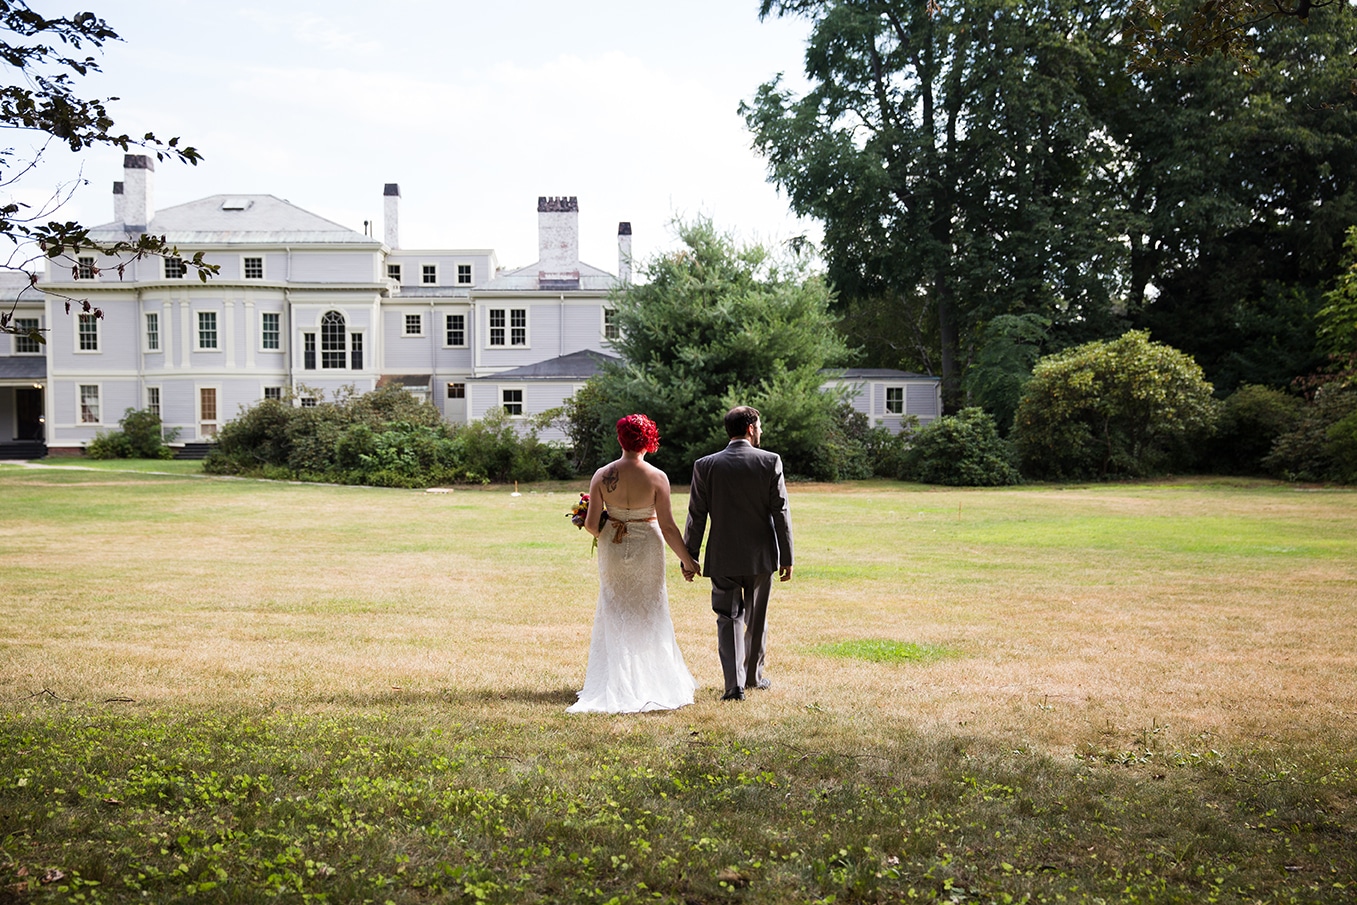 This photojournalistic portrait of a bride and groom at their Lyman Estate Wedding is one of the best wedding photographs of 2016